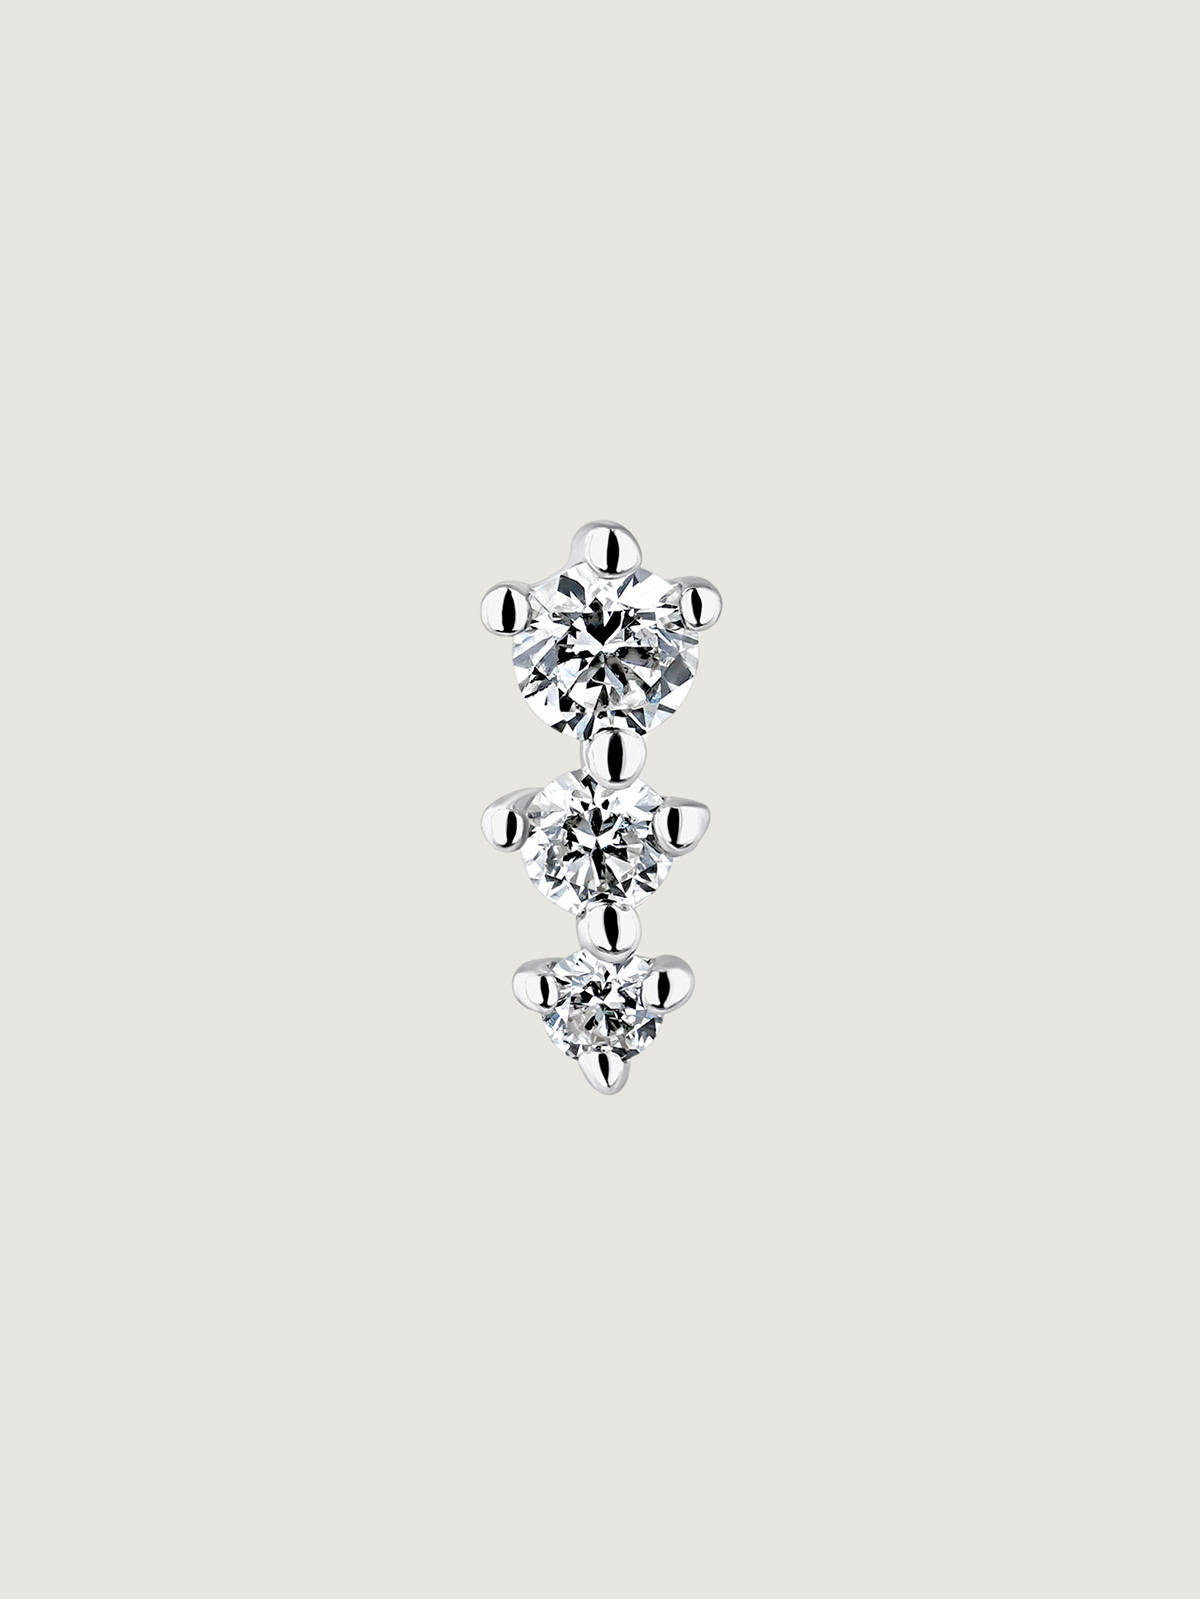 18k white gold piercing with diamonds